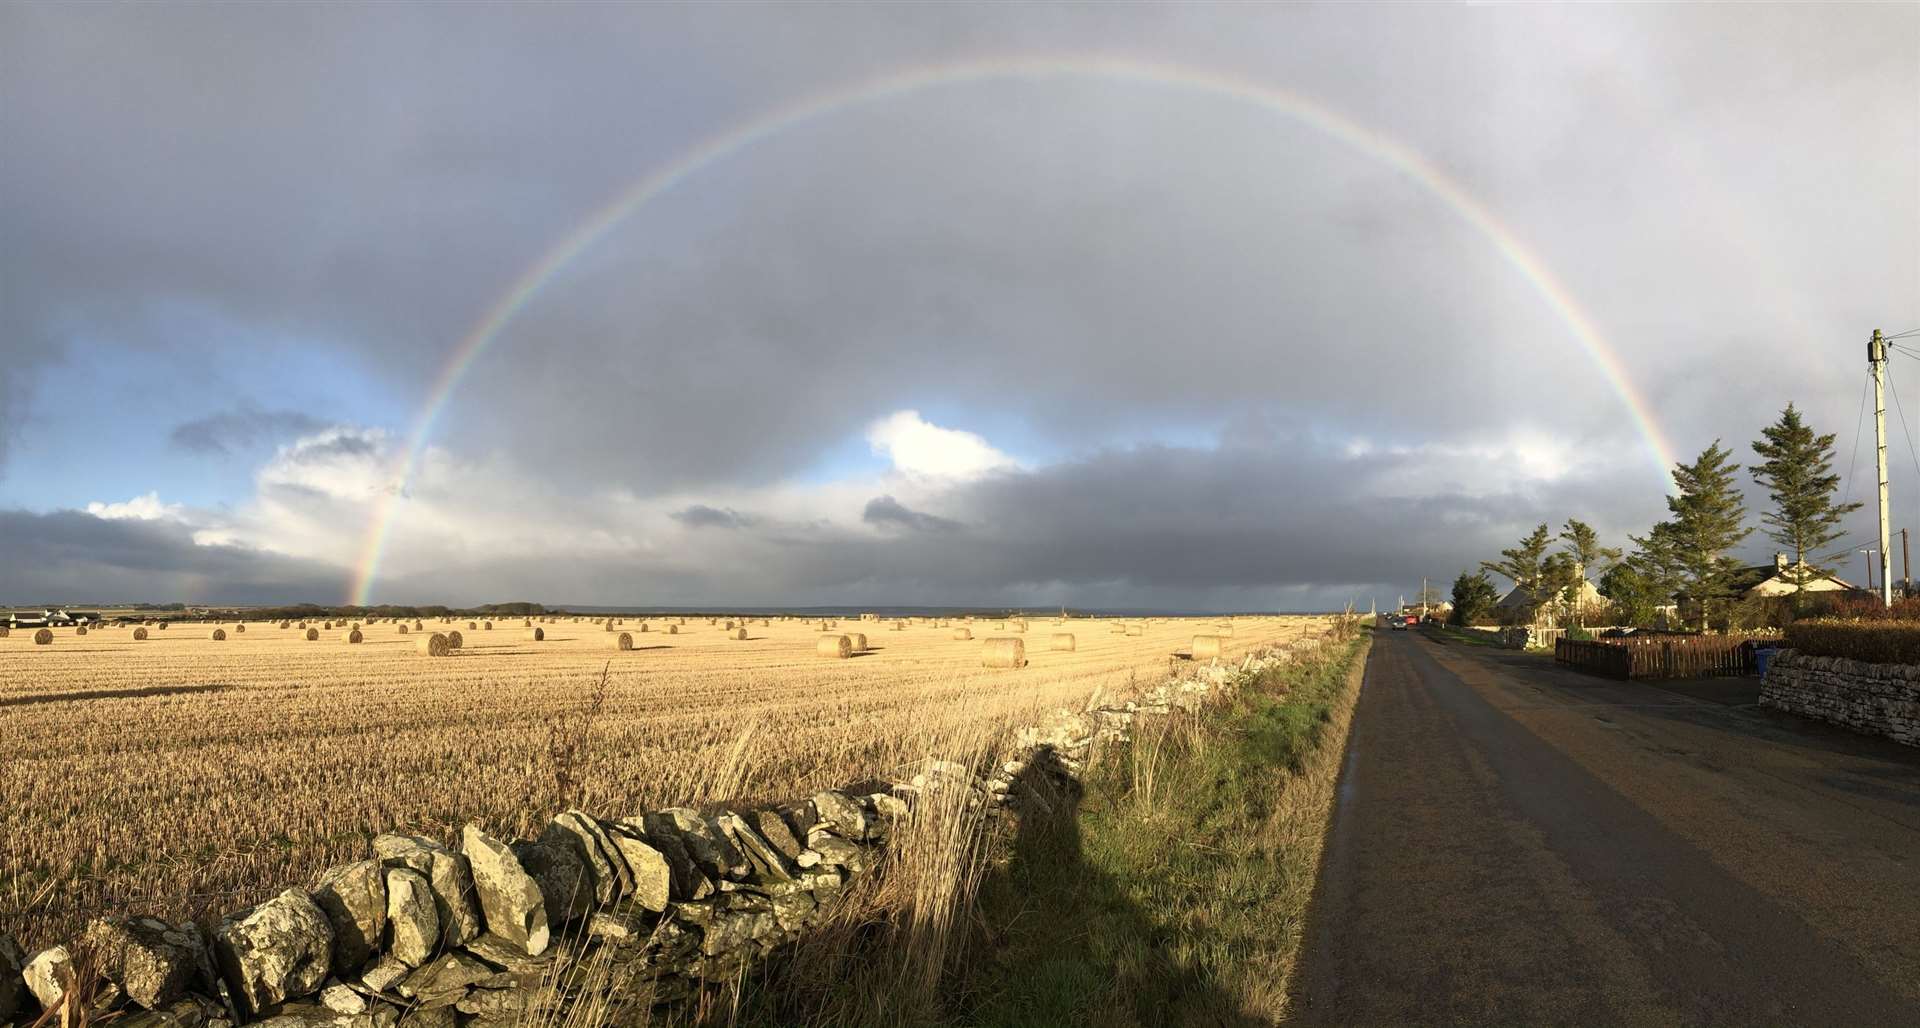 Neil Buchan sent this photo of a magnificent rainbow, taken this week from the Ackergill road-end en route to Castletown.